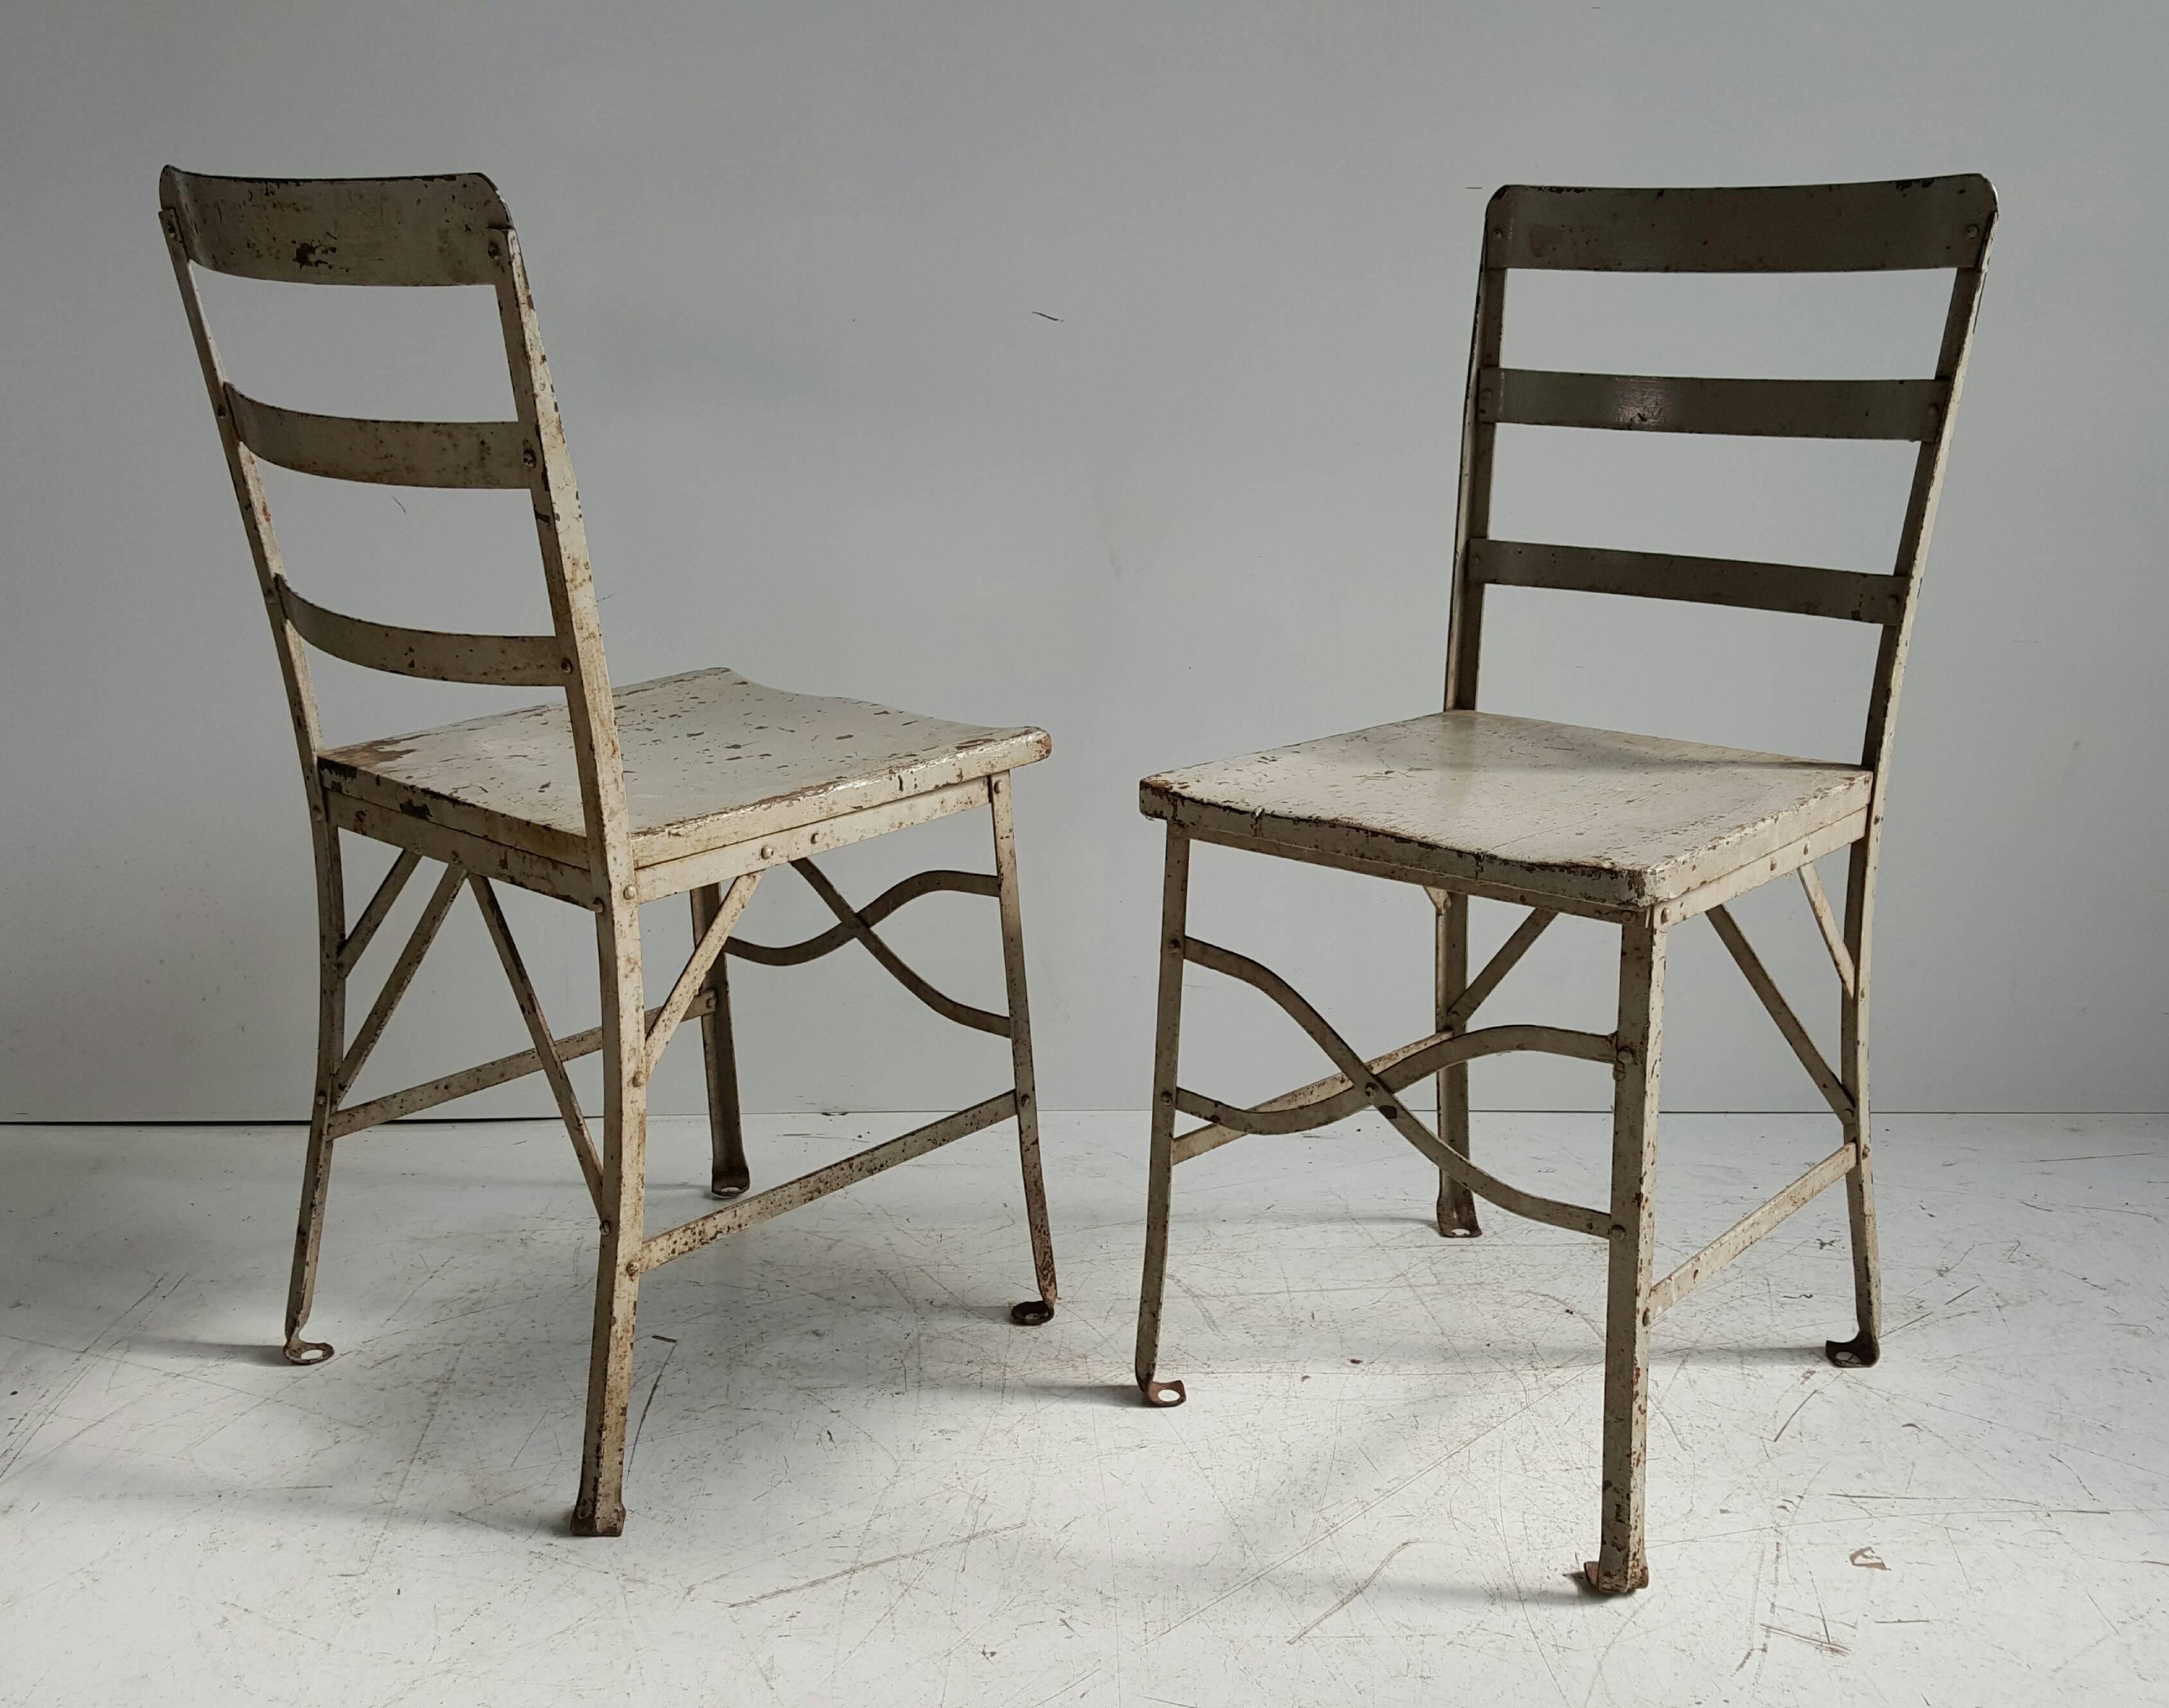 Pair of American modernist industrial chairs, old factory grey paint, attributed to Toledo metal furniture co., one of the lesser seen versions, wonderful finish, patina, charming pair, amazing quality and construction, heavy.